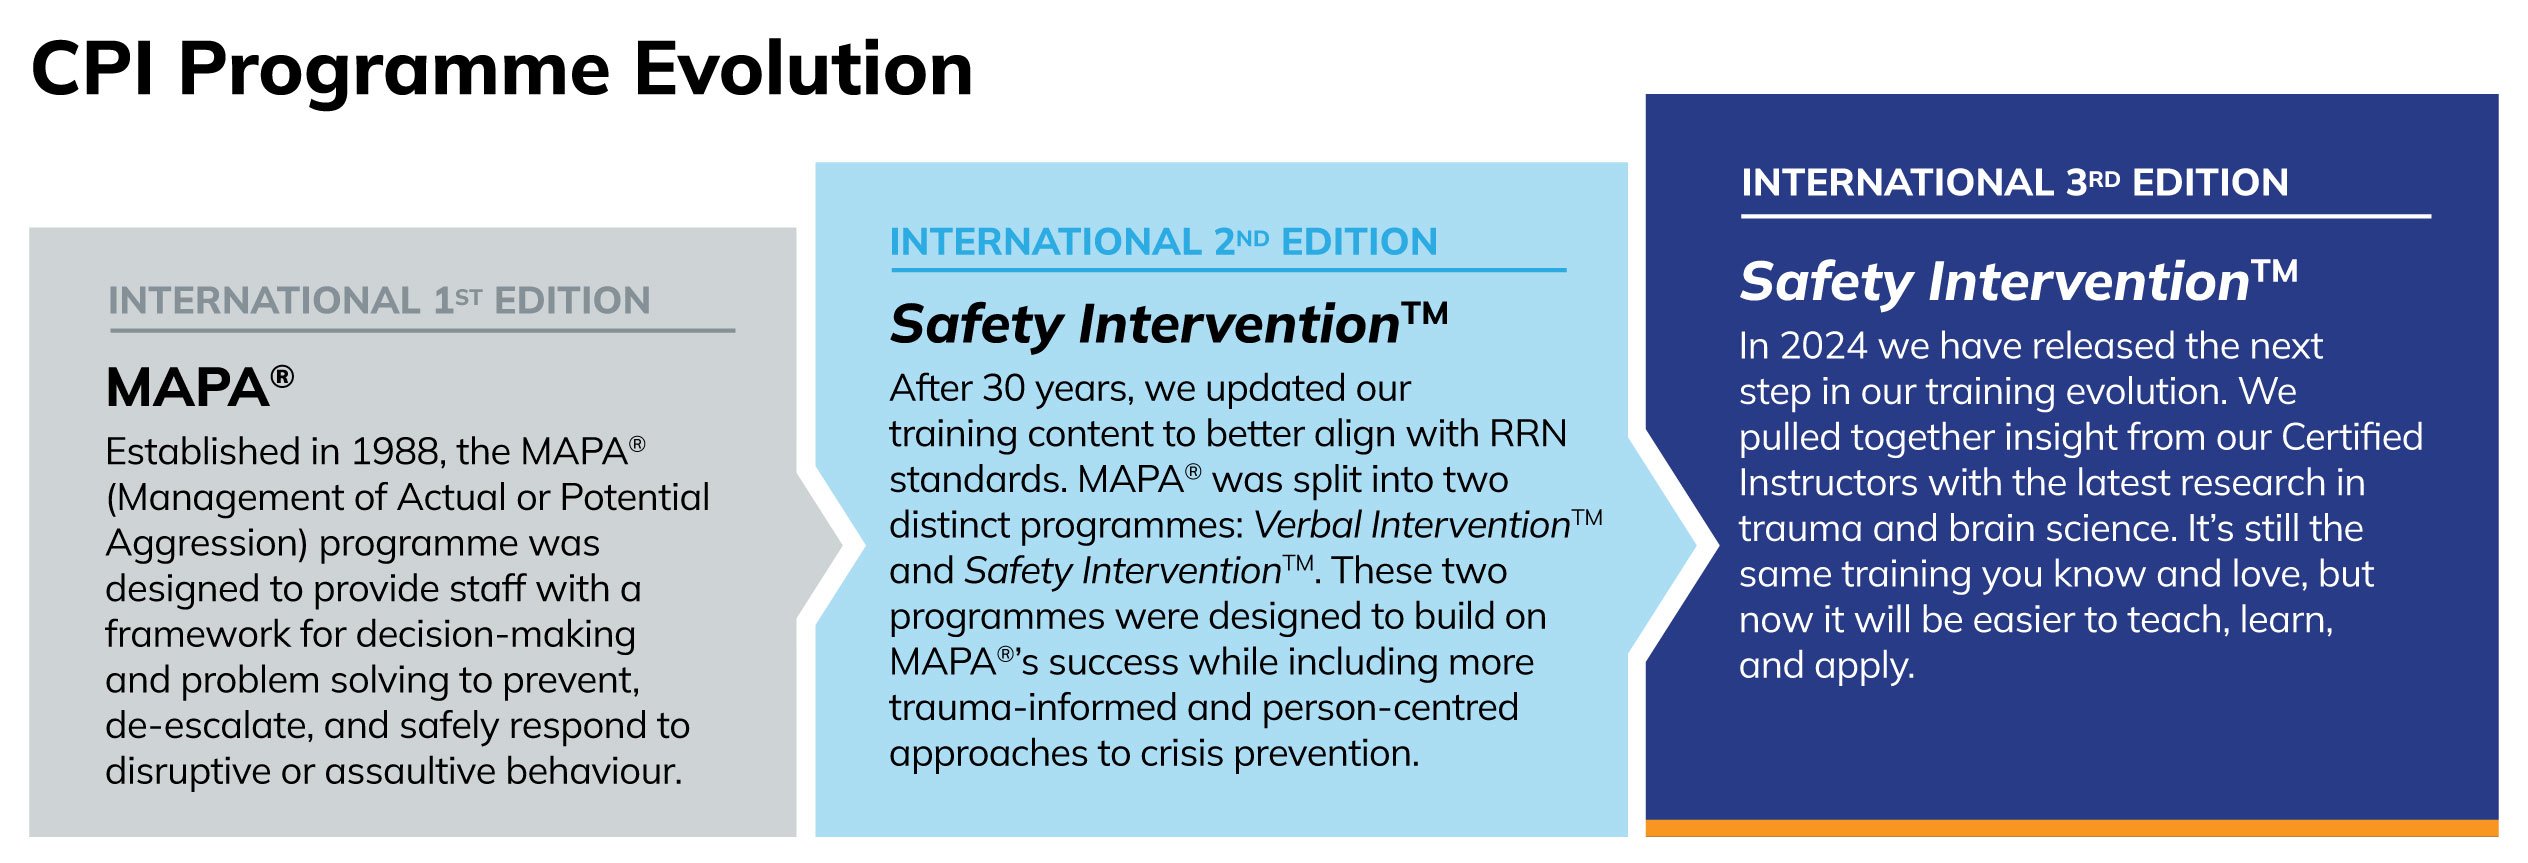 This graphic illustrates the evolution of the training programme MAPA over the years from the 1er edition to the 3rd edition. The programme MAPA became in 2021 Safety Intervention